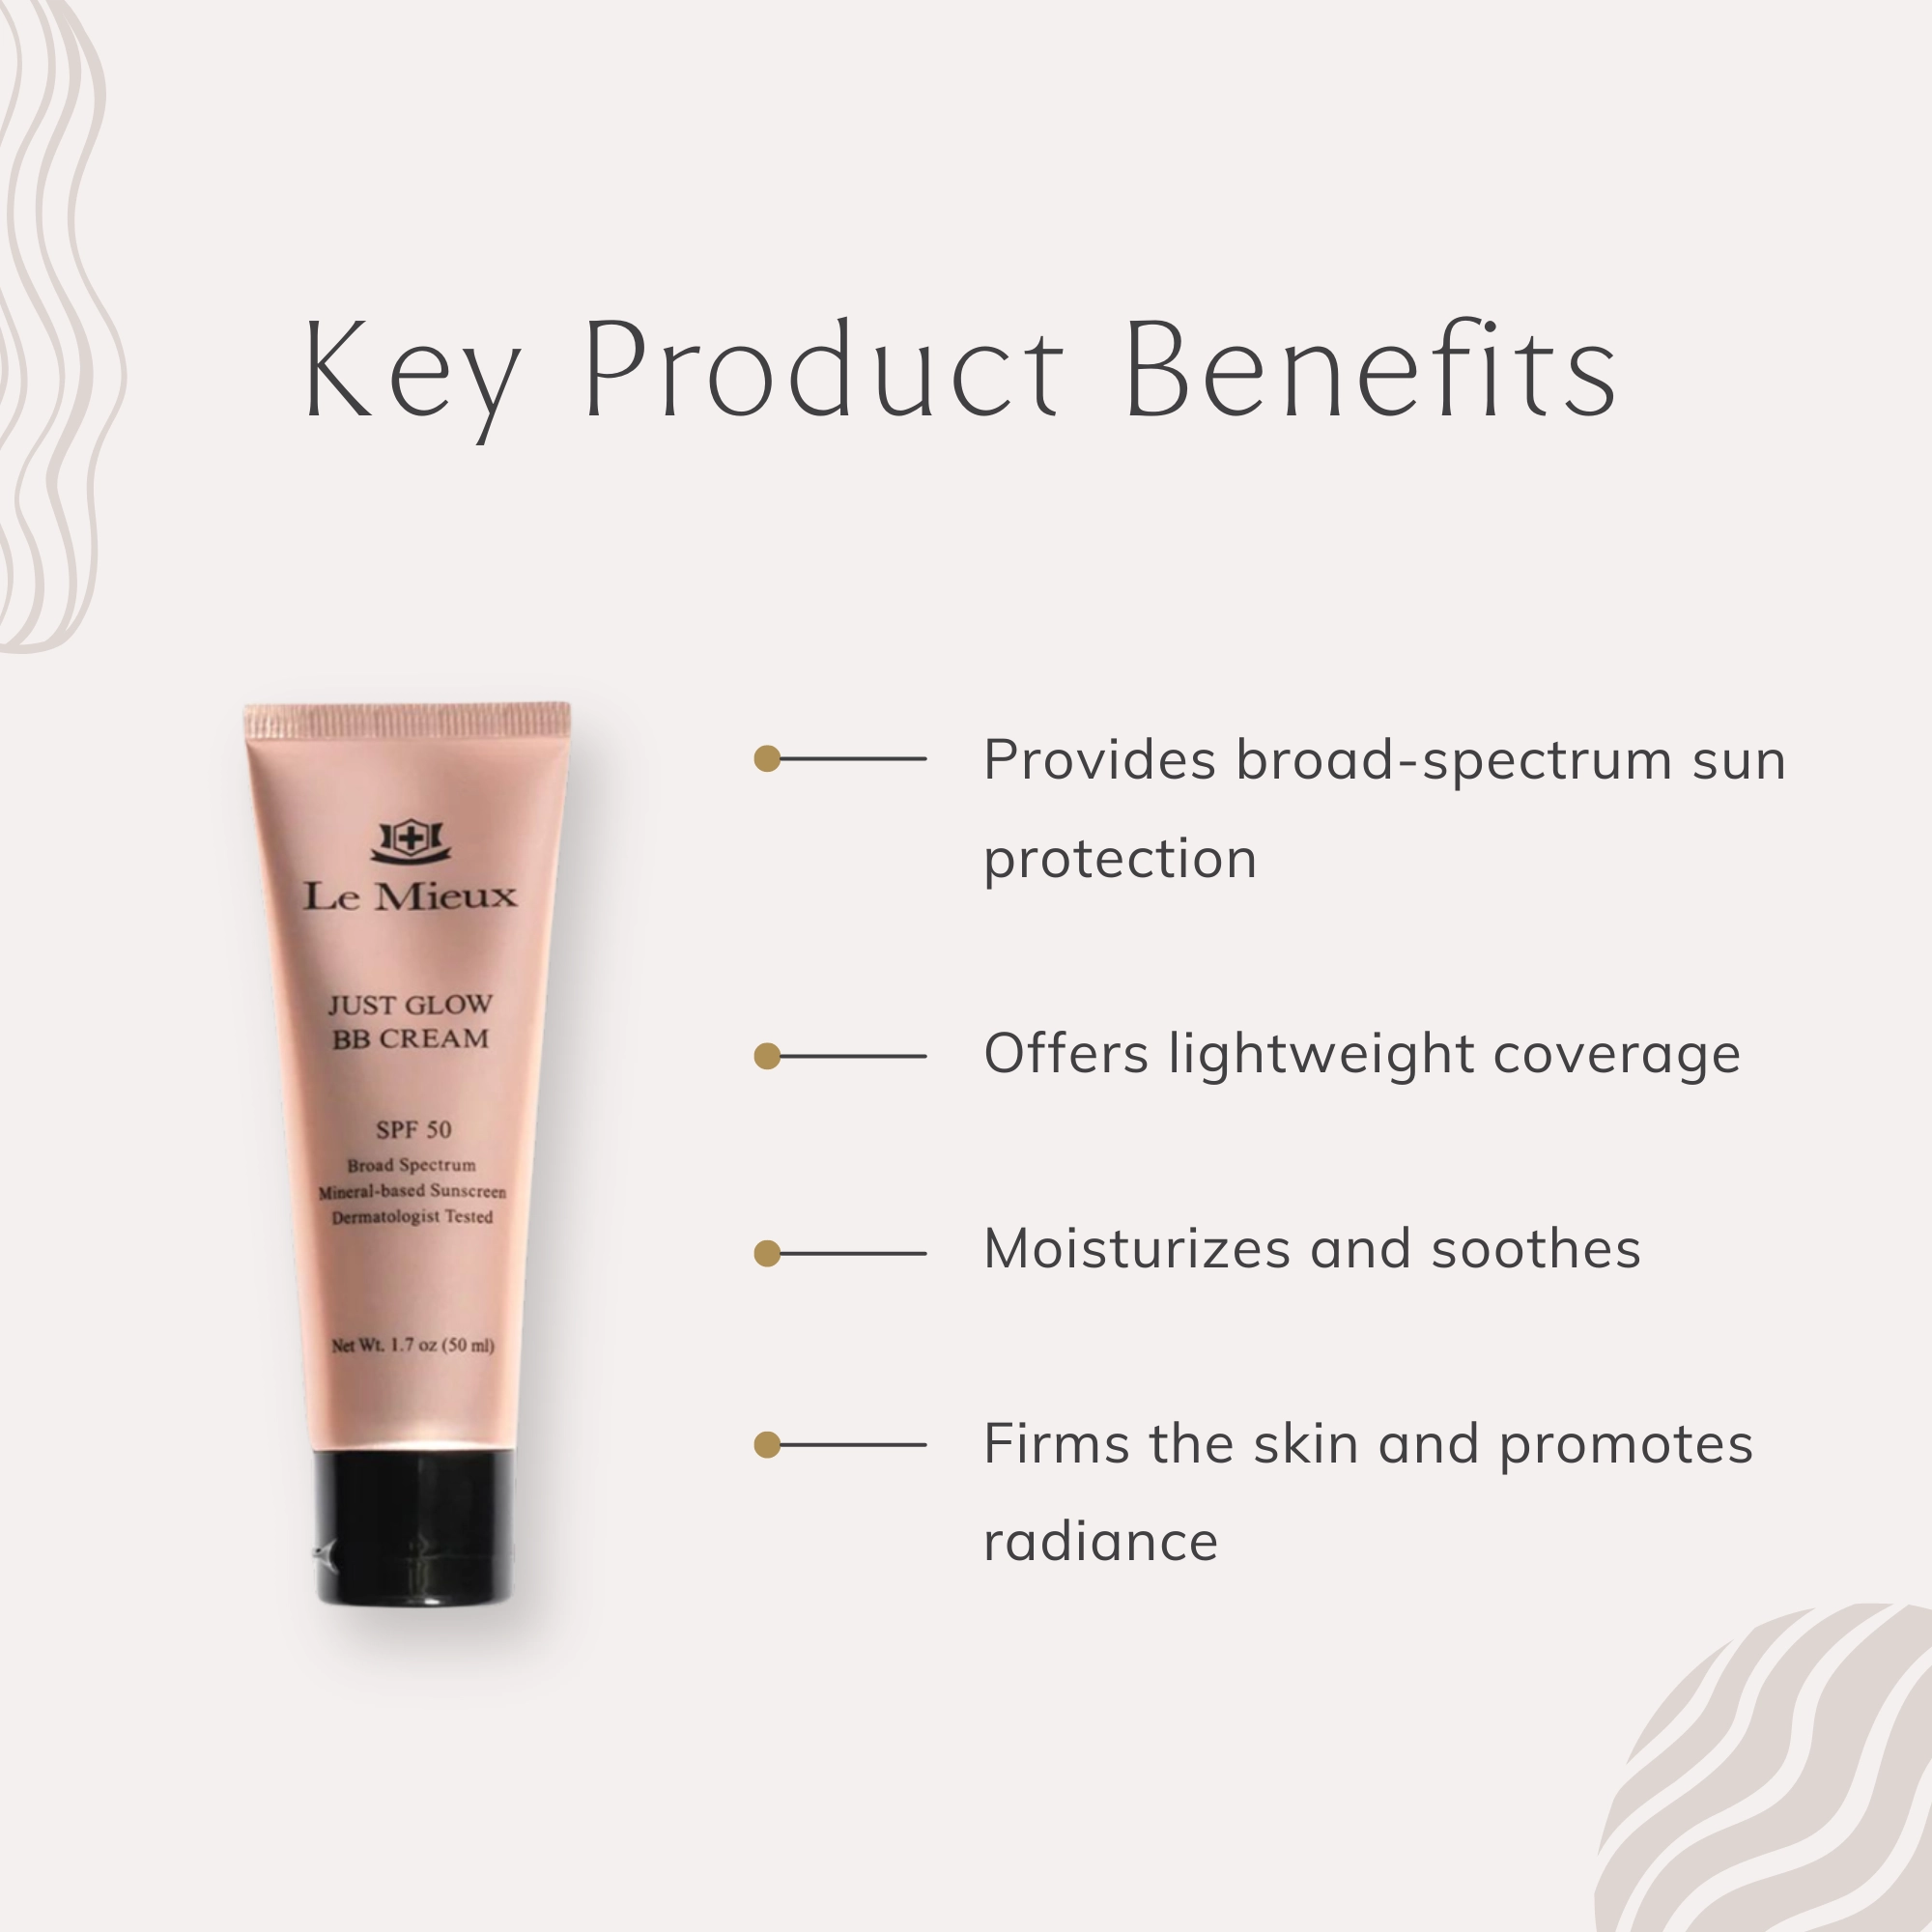 Le Mieux Just Glow BB Cream SPF 50